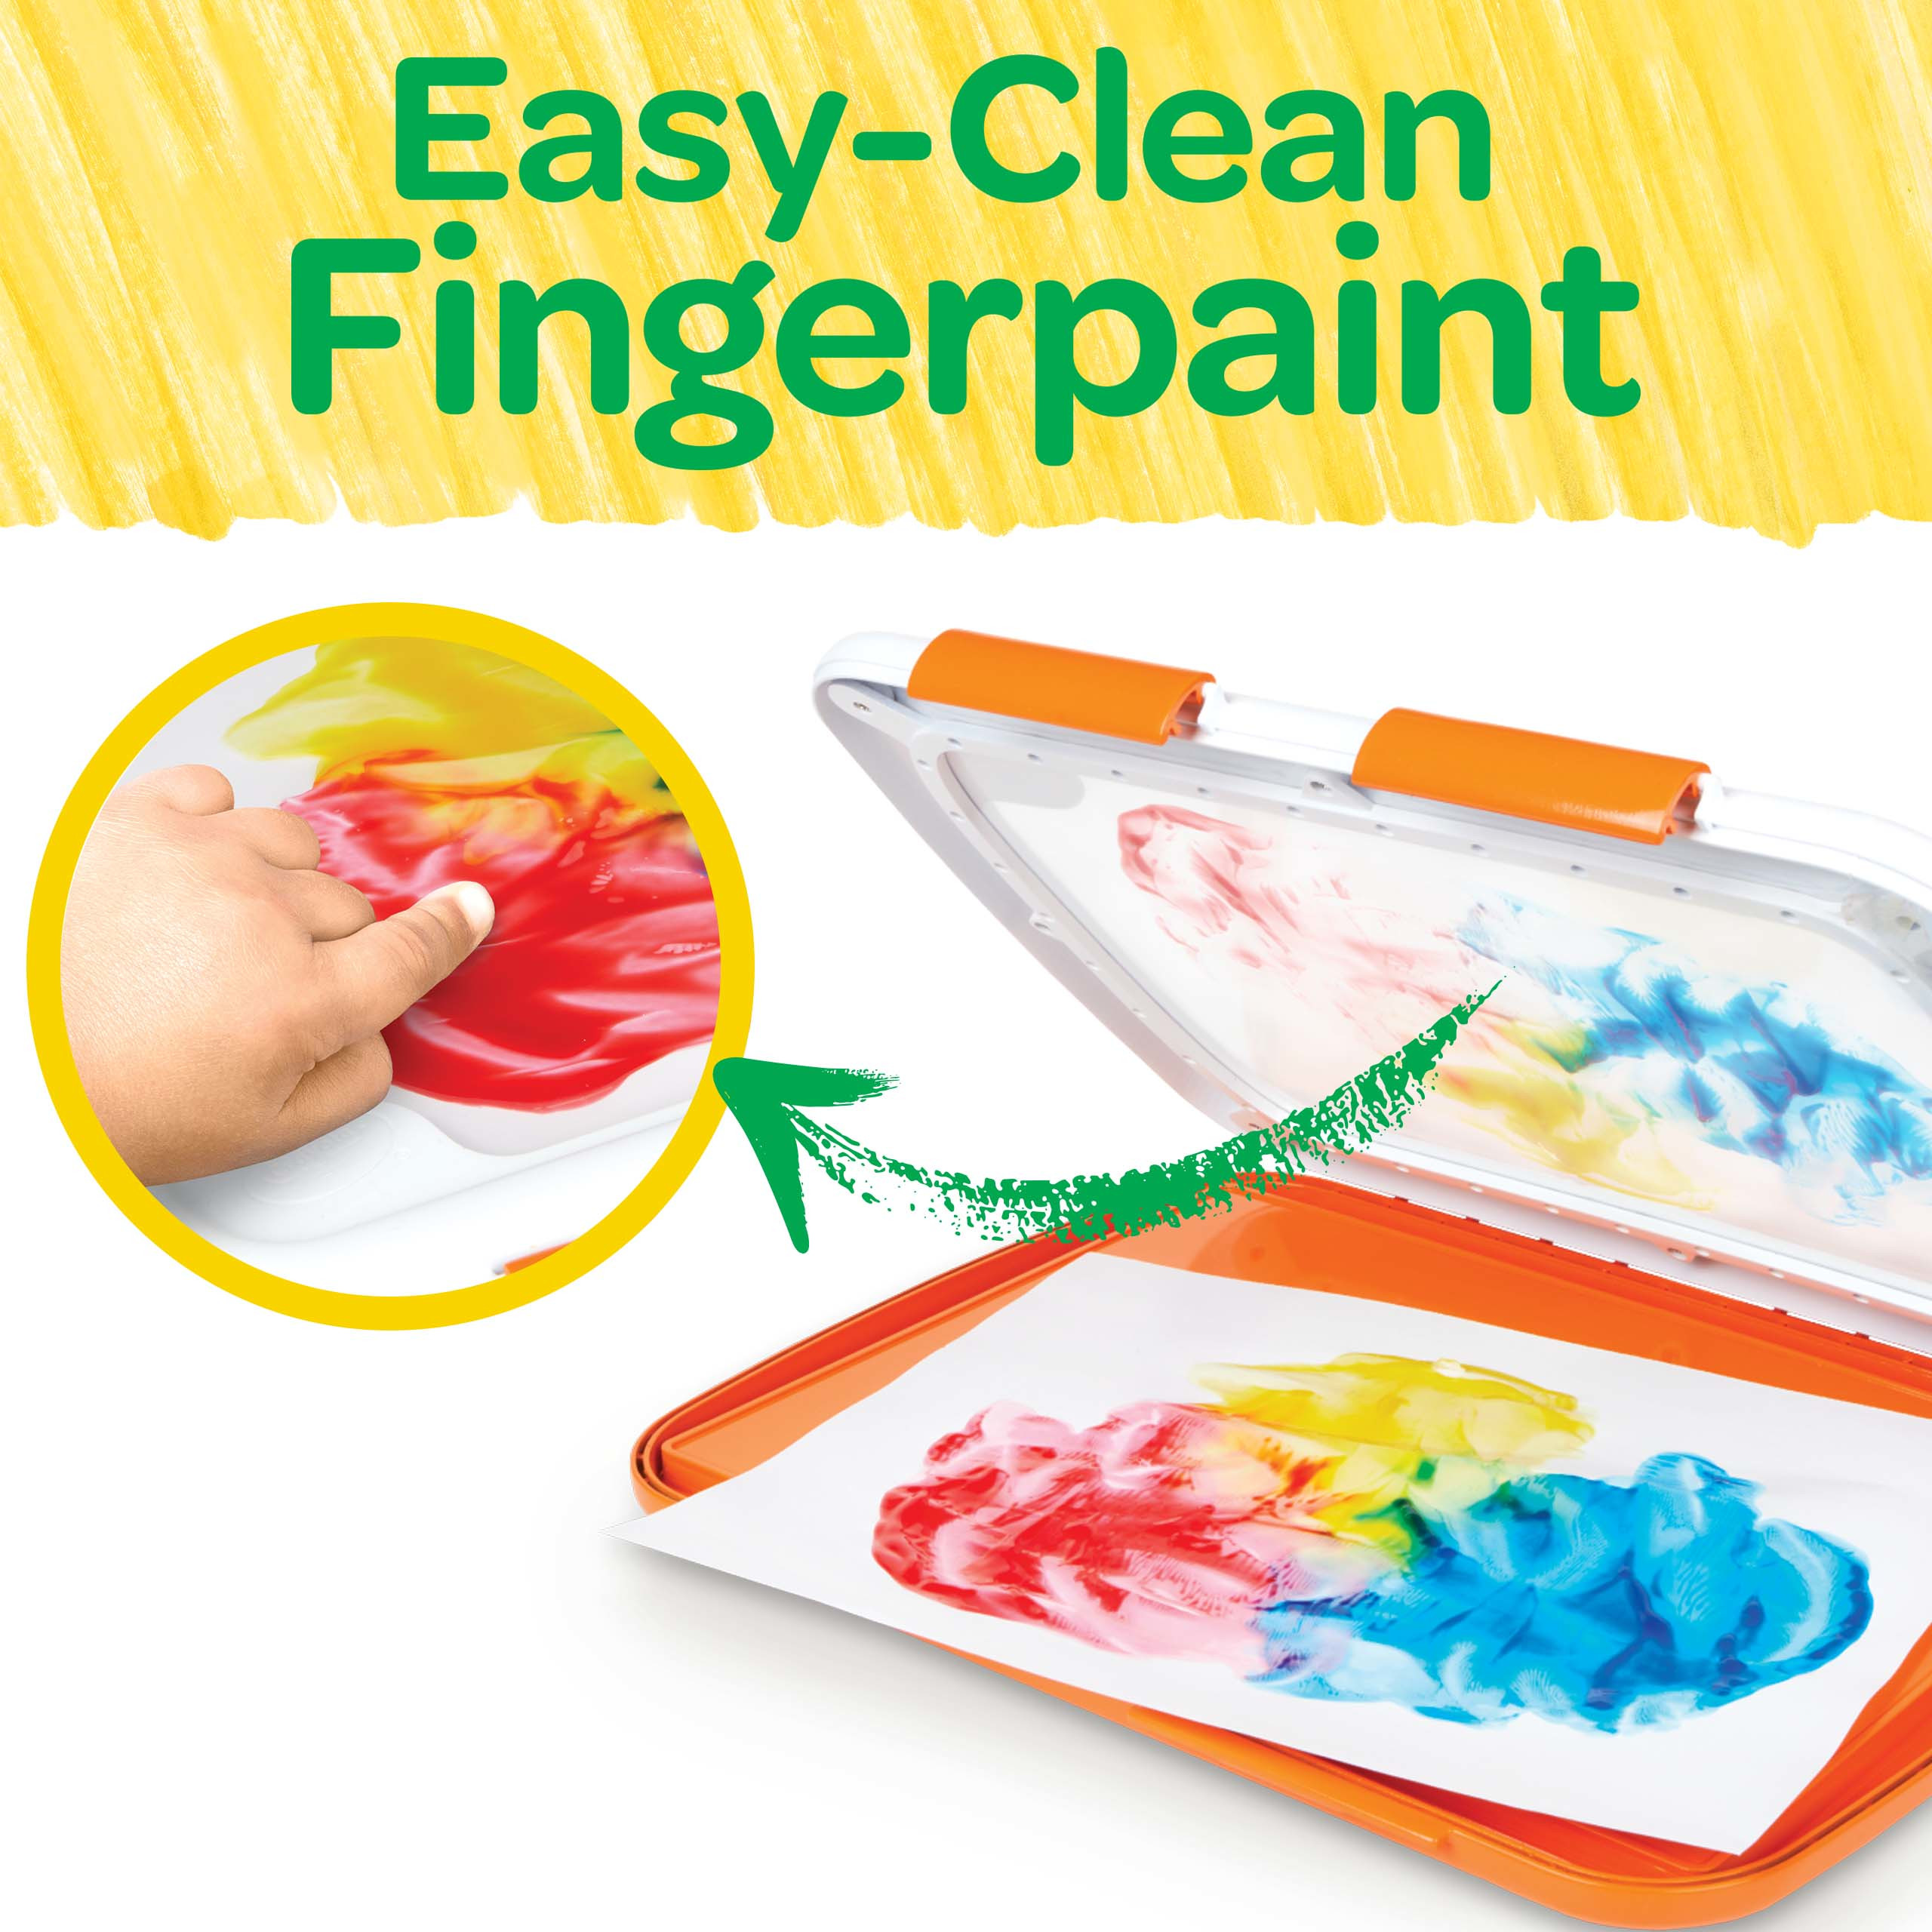 Crayola Washable Finger Paint Station, Less Mess Finger Paints for Toddlers, Gift - image 5 of 9